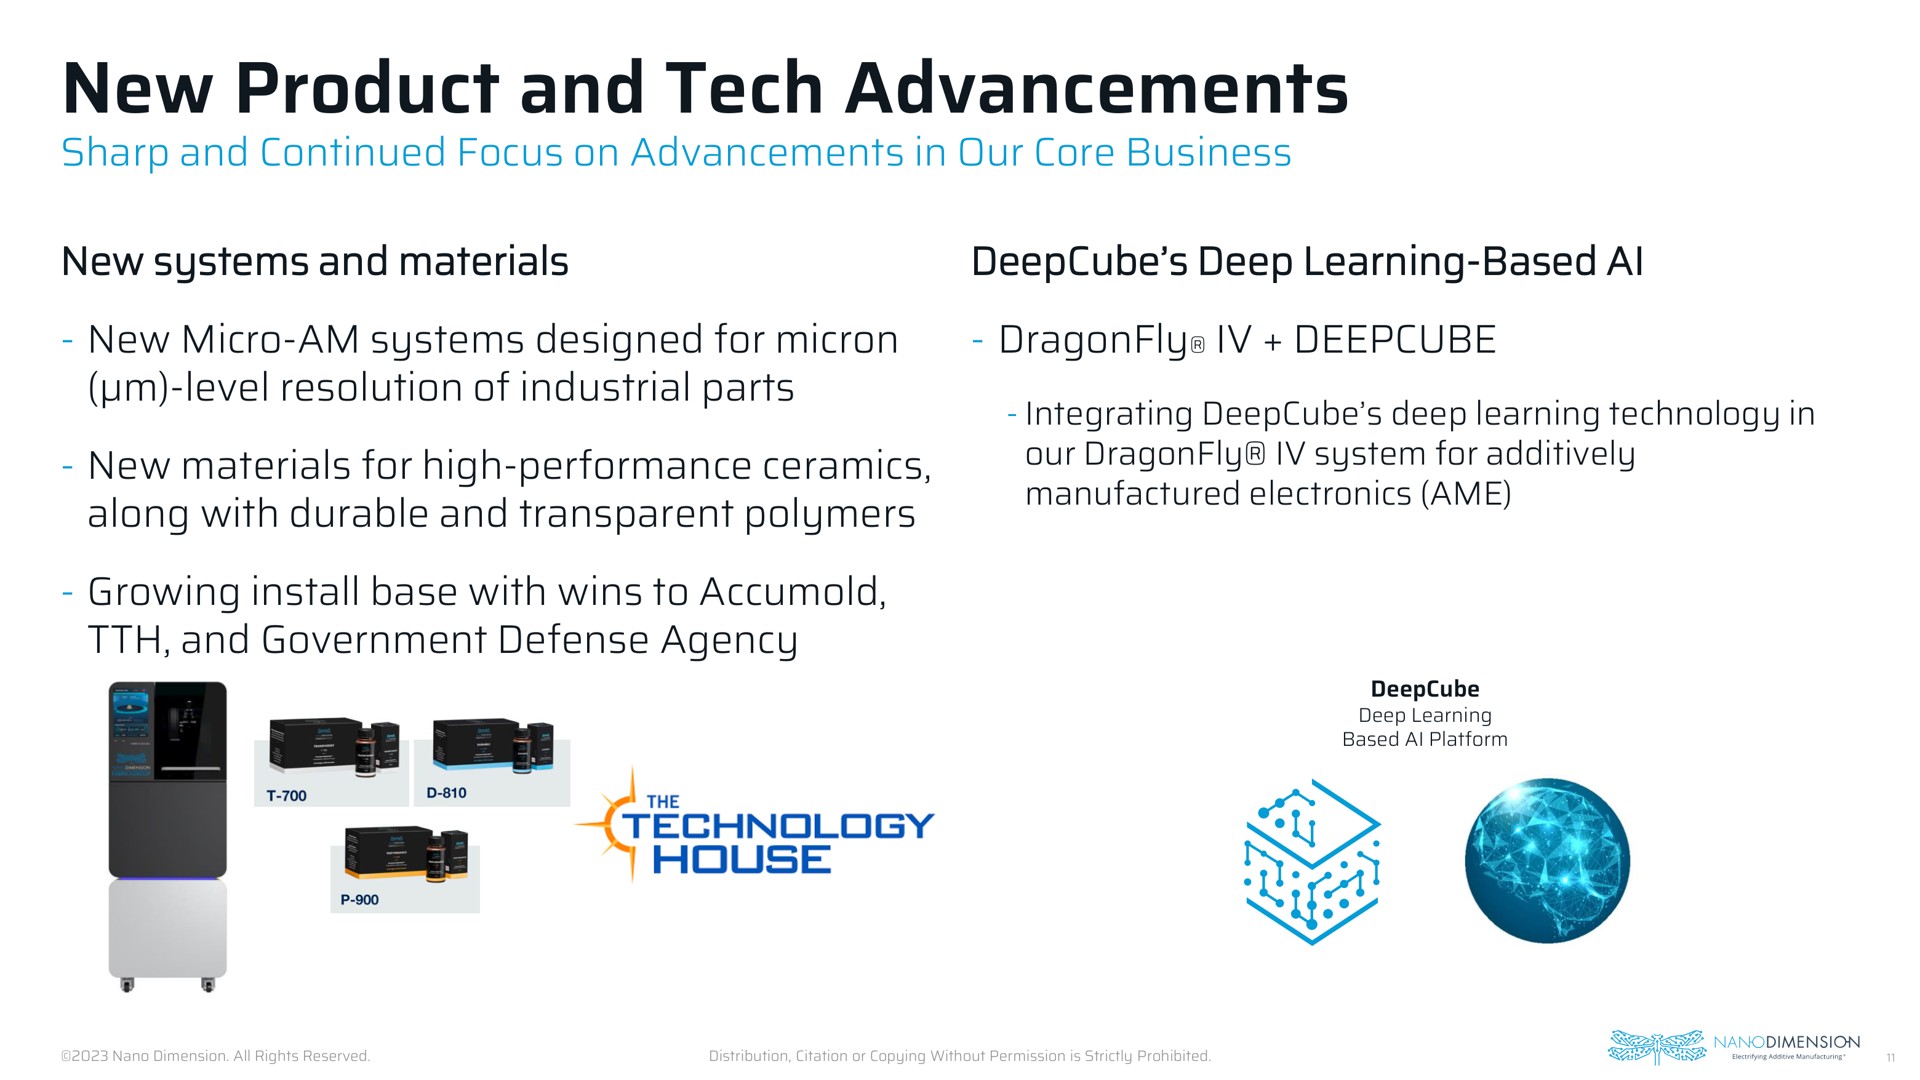 new product and tech advancements tee technology house i a | Nano Dimension